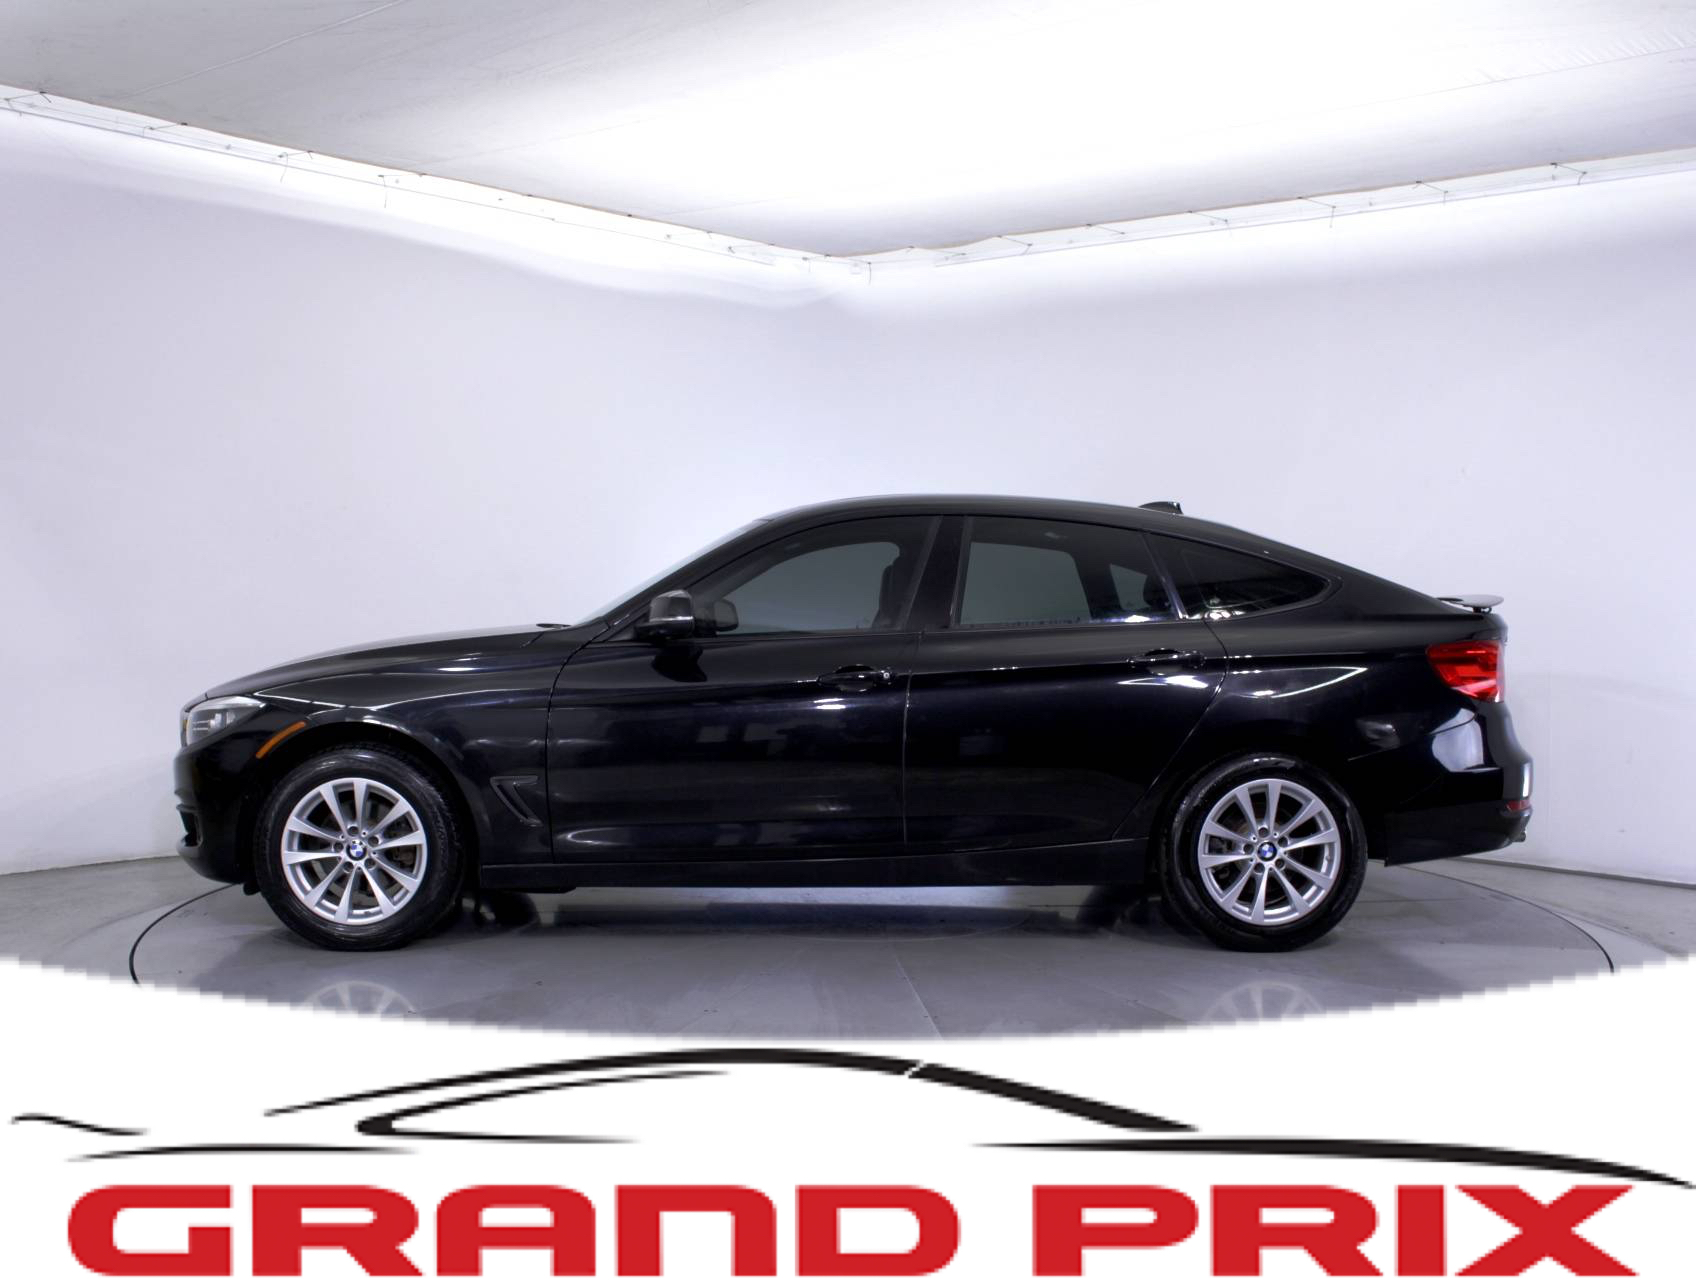 Used 14 Bmw 3 Series 328i Xdrive Gran Turismo Hatchback For Sale In Hollywood Fl 866 Florida Fine Cars